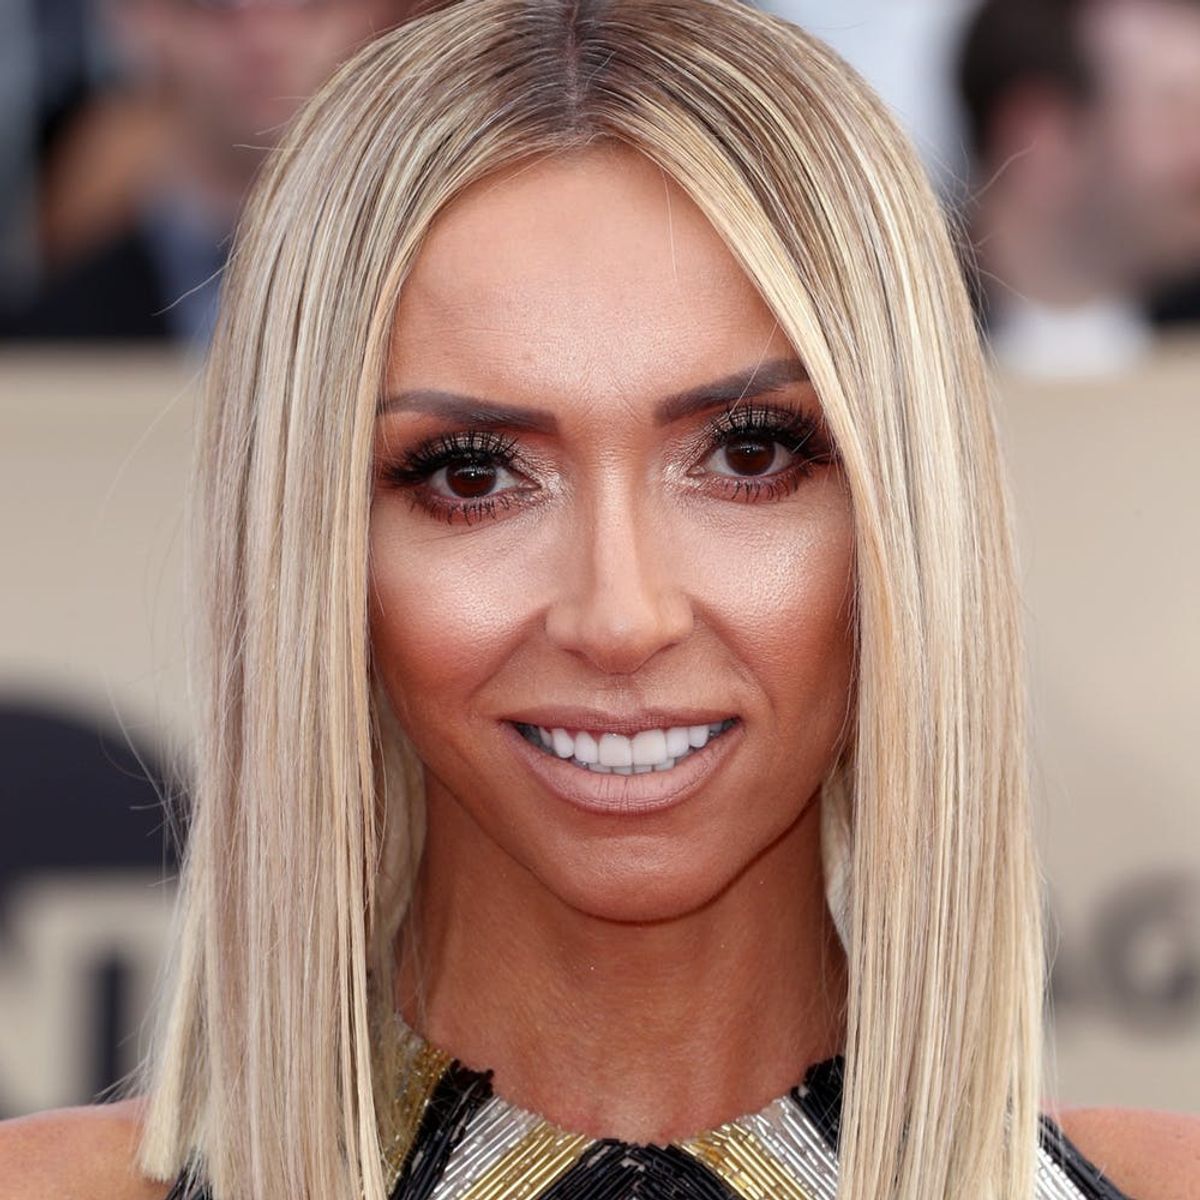 Giuliana Rancic Will Return to ‘E! News’ in the Wake of Catt Sadler’s Controversial Departure